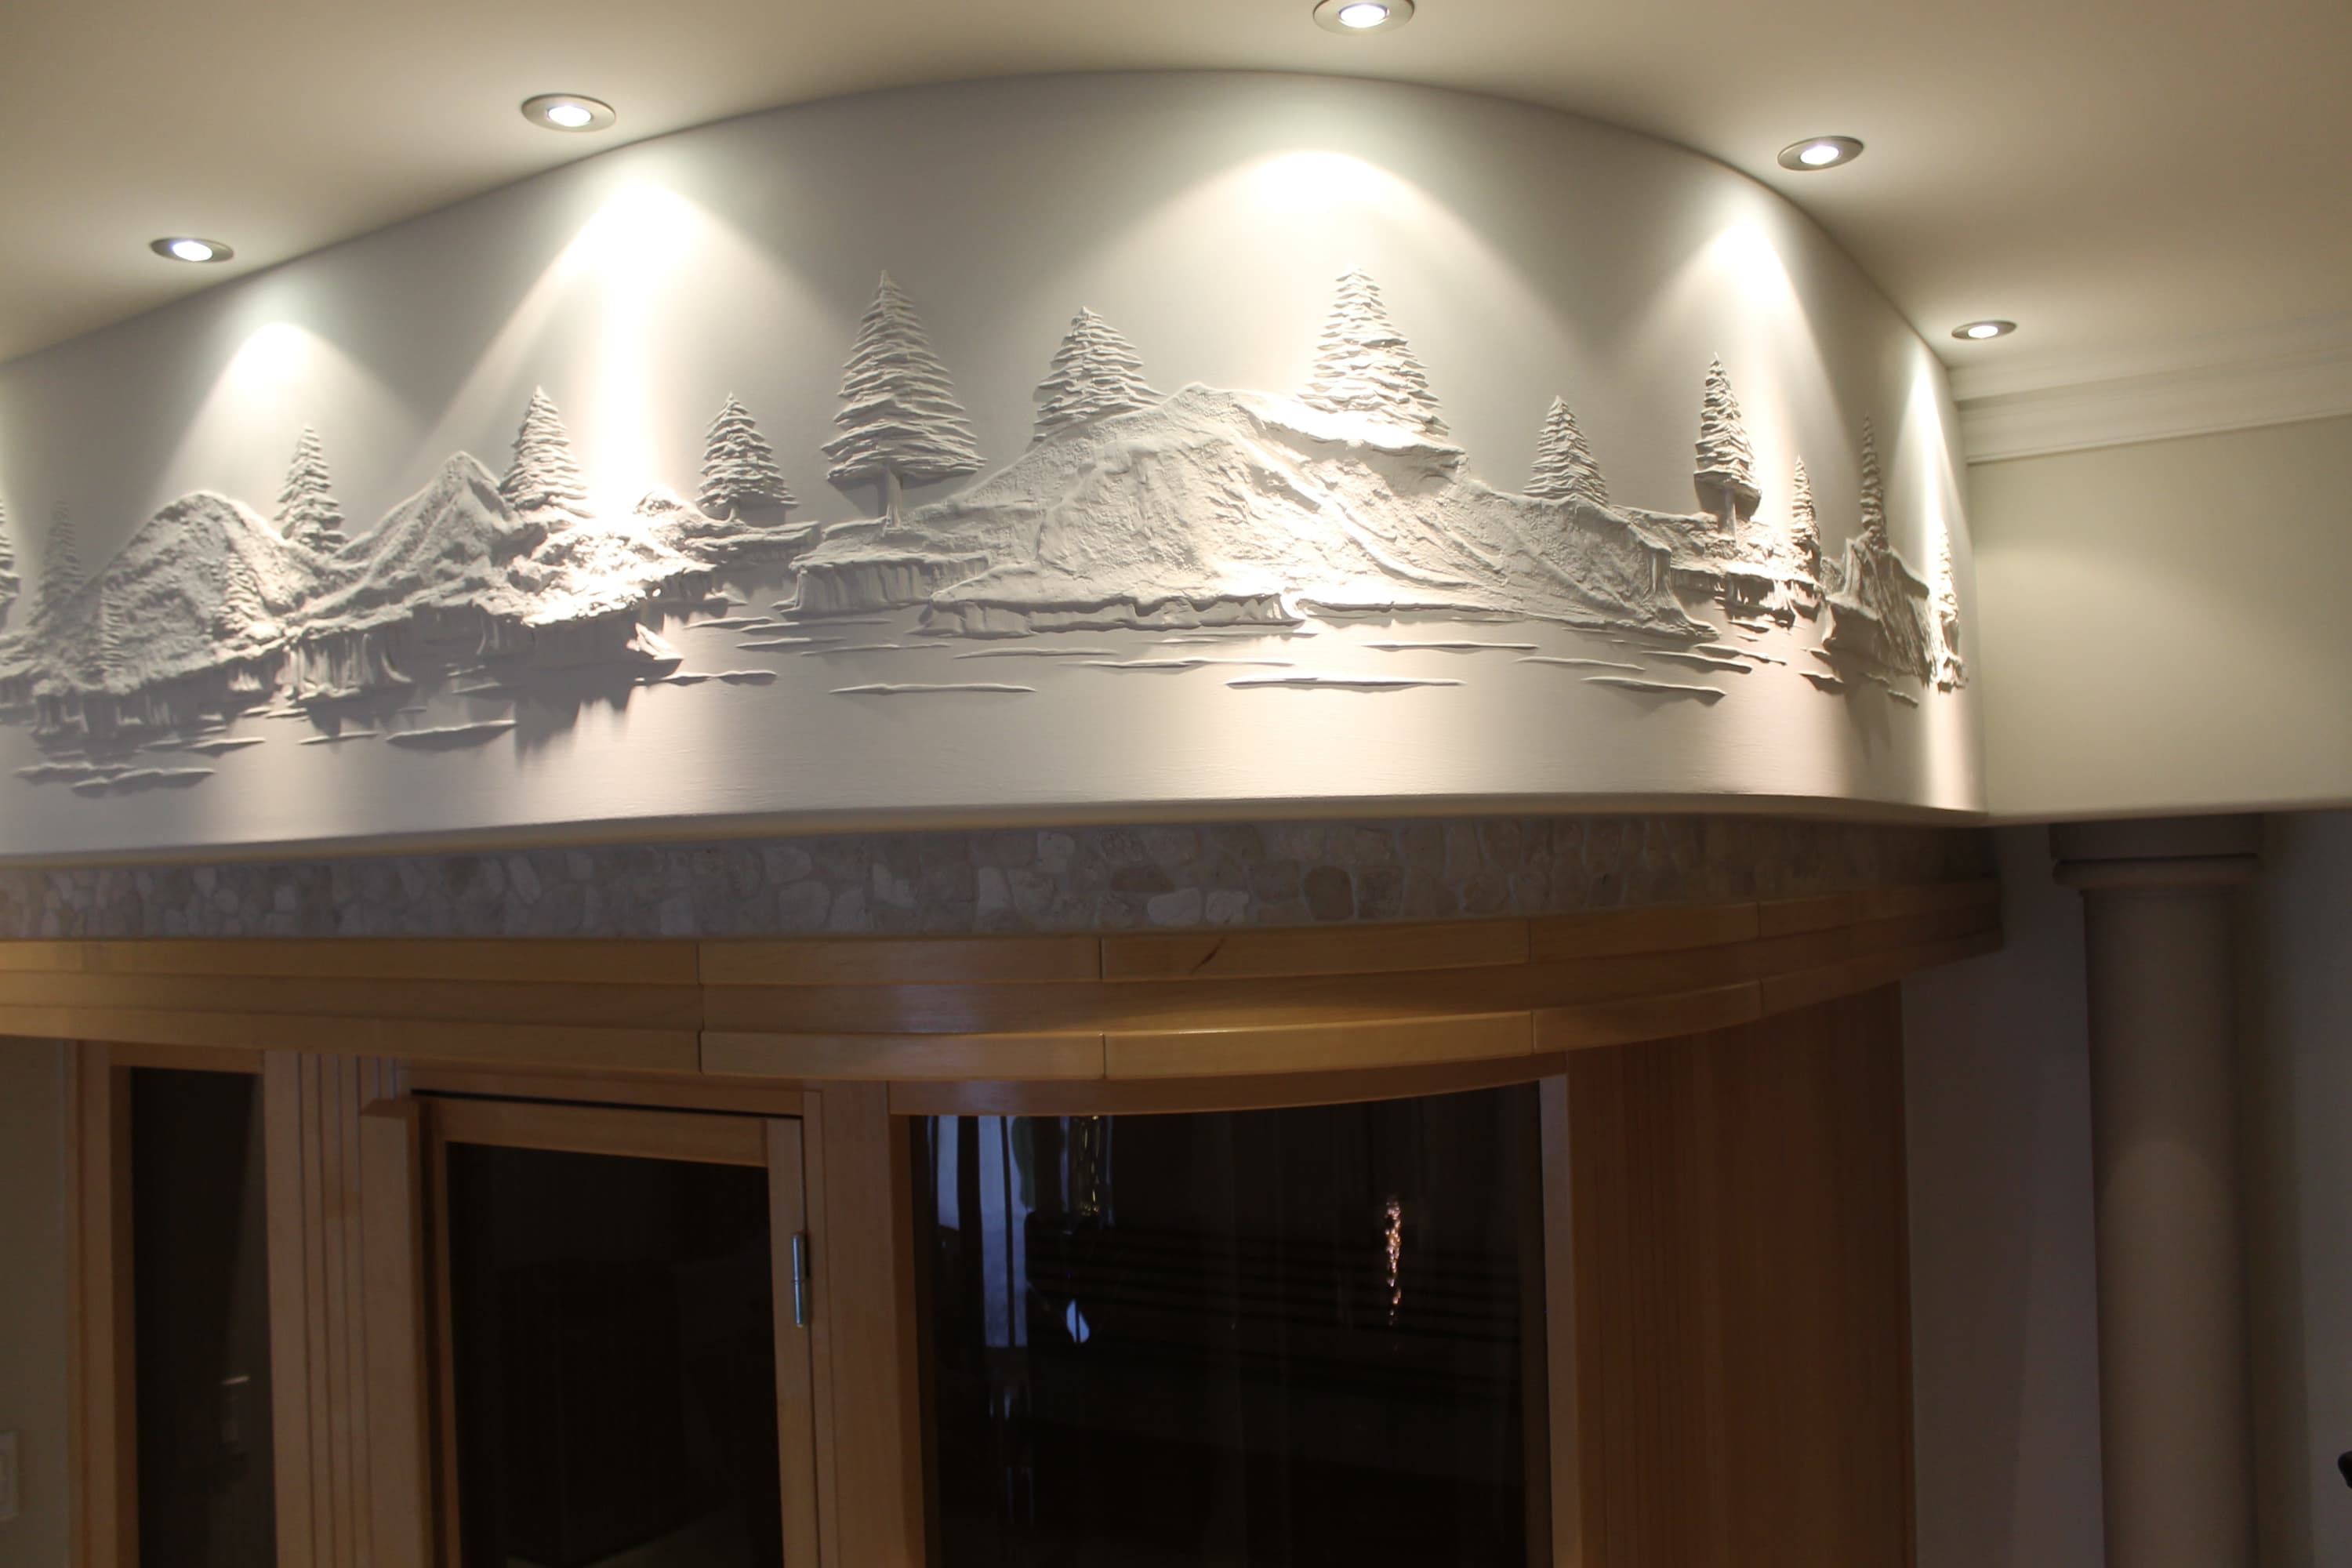 Bernie Mitchell creates custom sculptures out of drywall compound and Trim-Tex products.